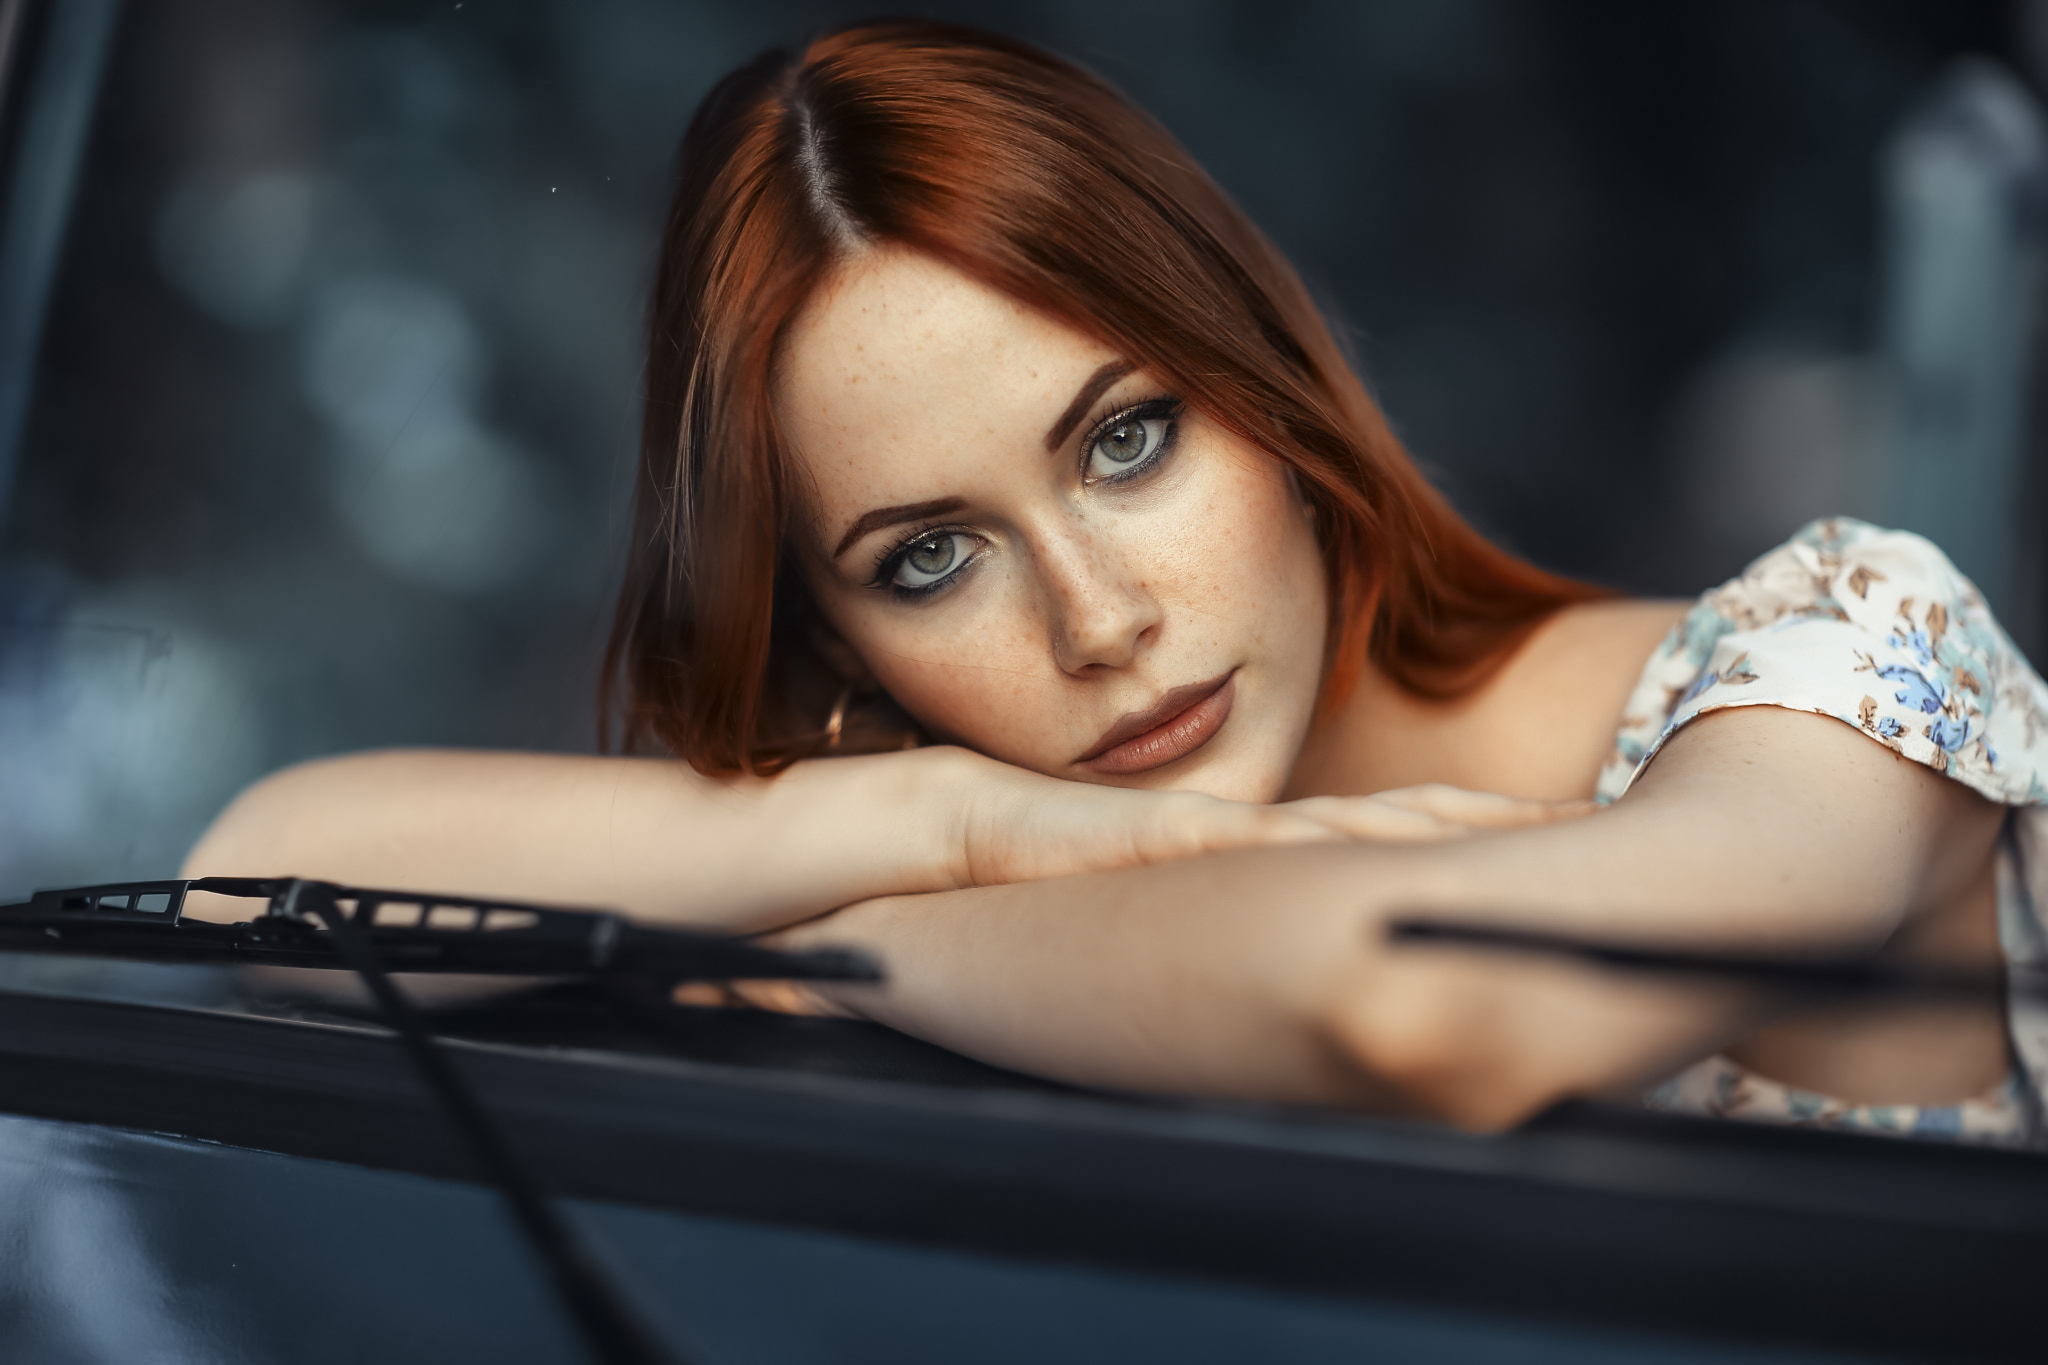 Alessandro Di Cicco Women Redhead Makeup Eyeliner Freckles Lipstick Looking At Viewer Windshield Wip 2048x1365